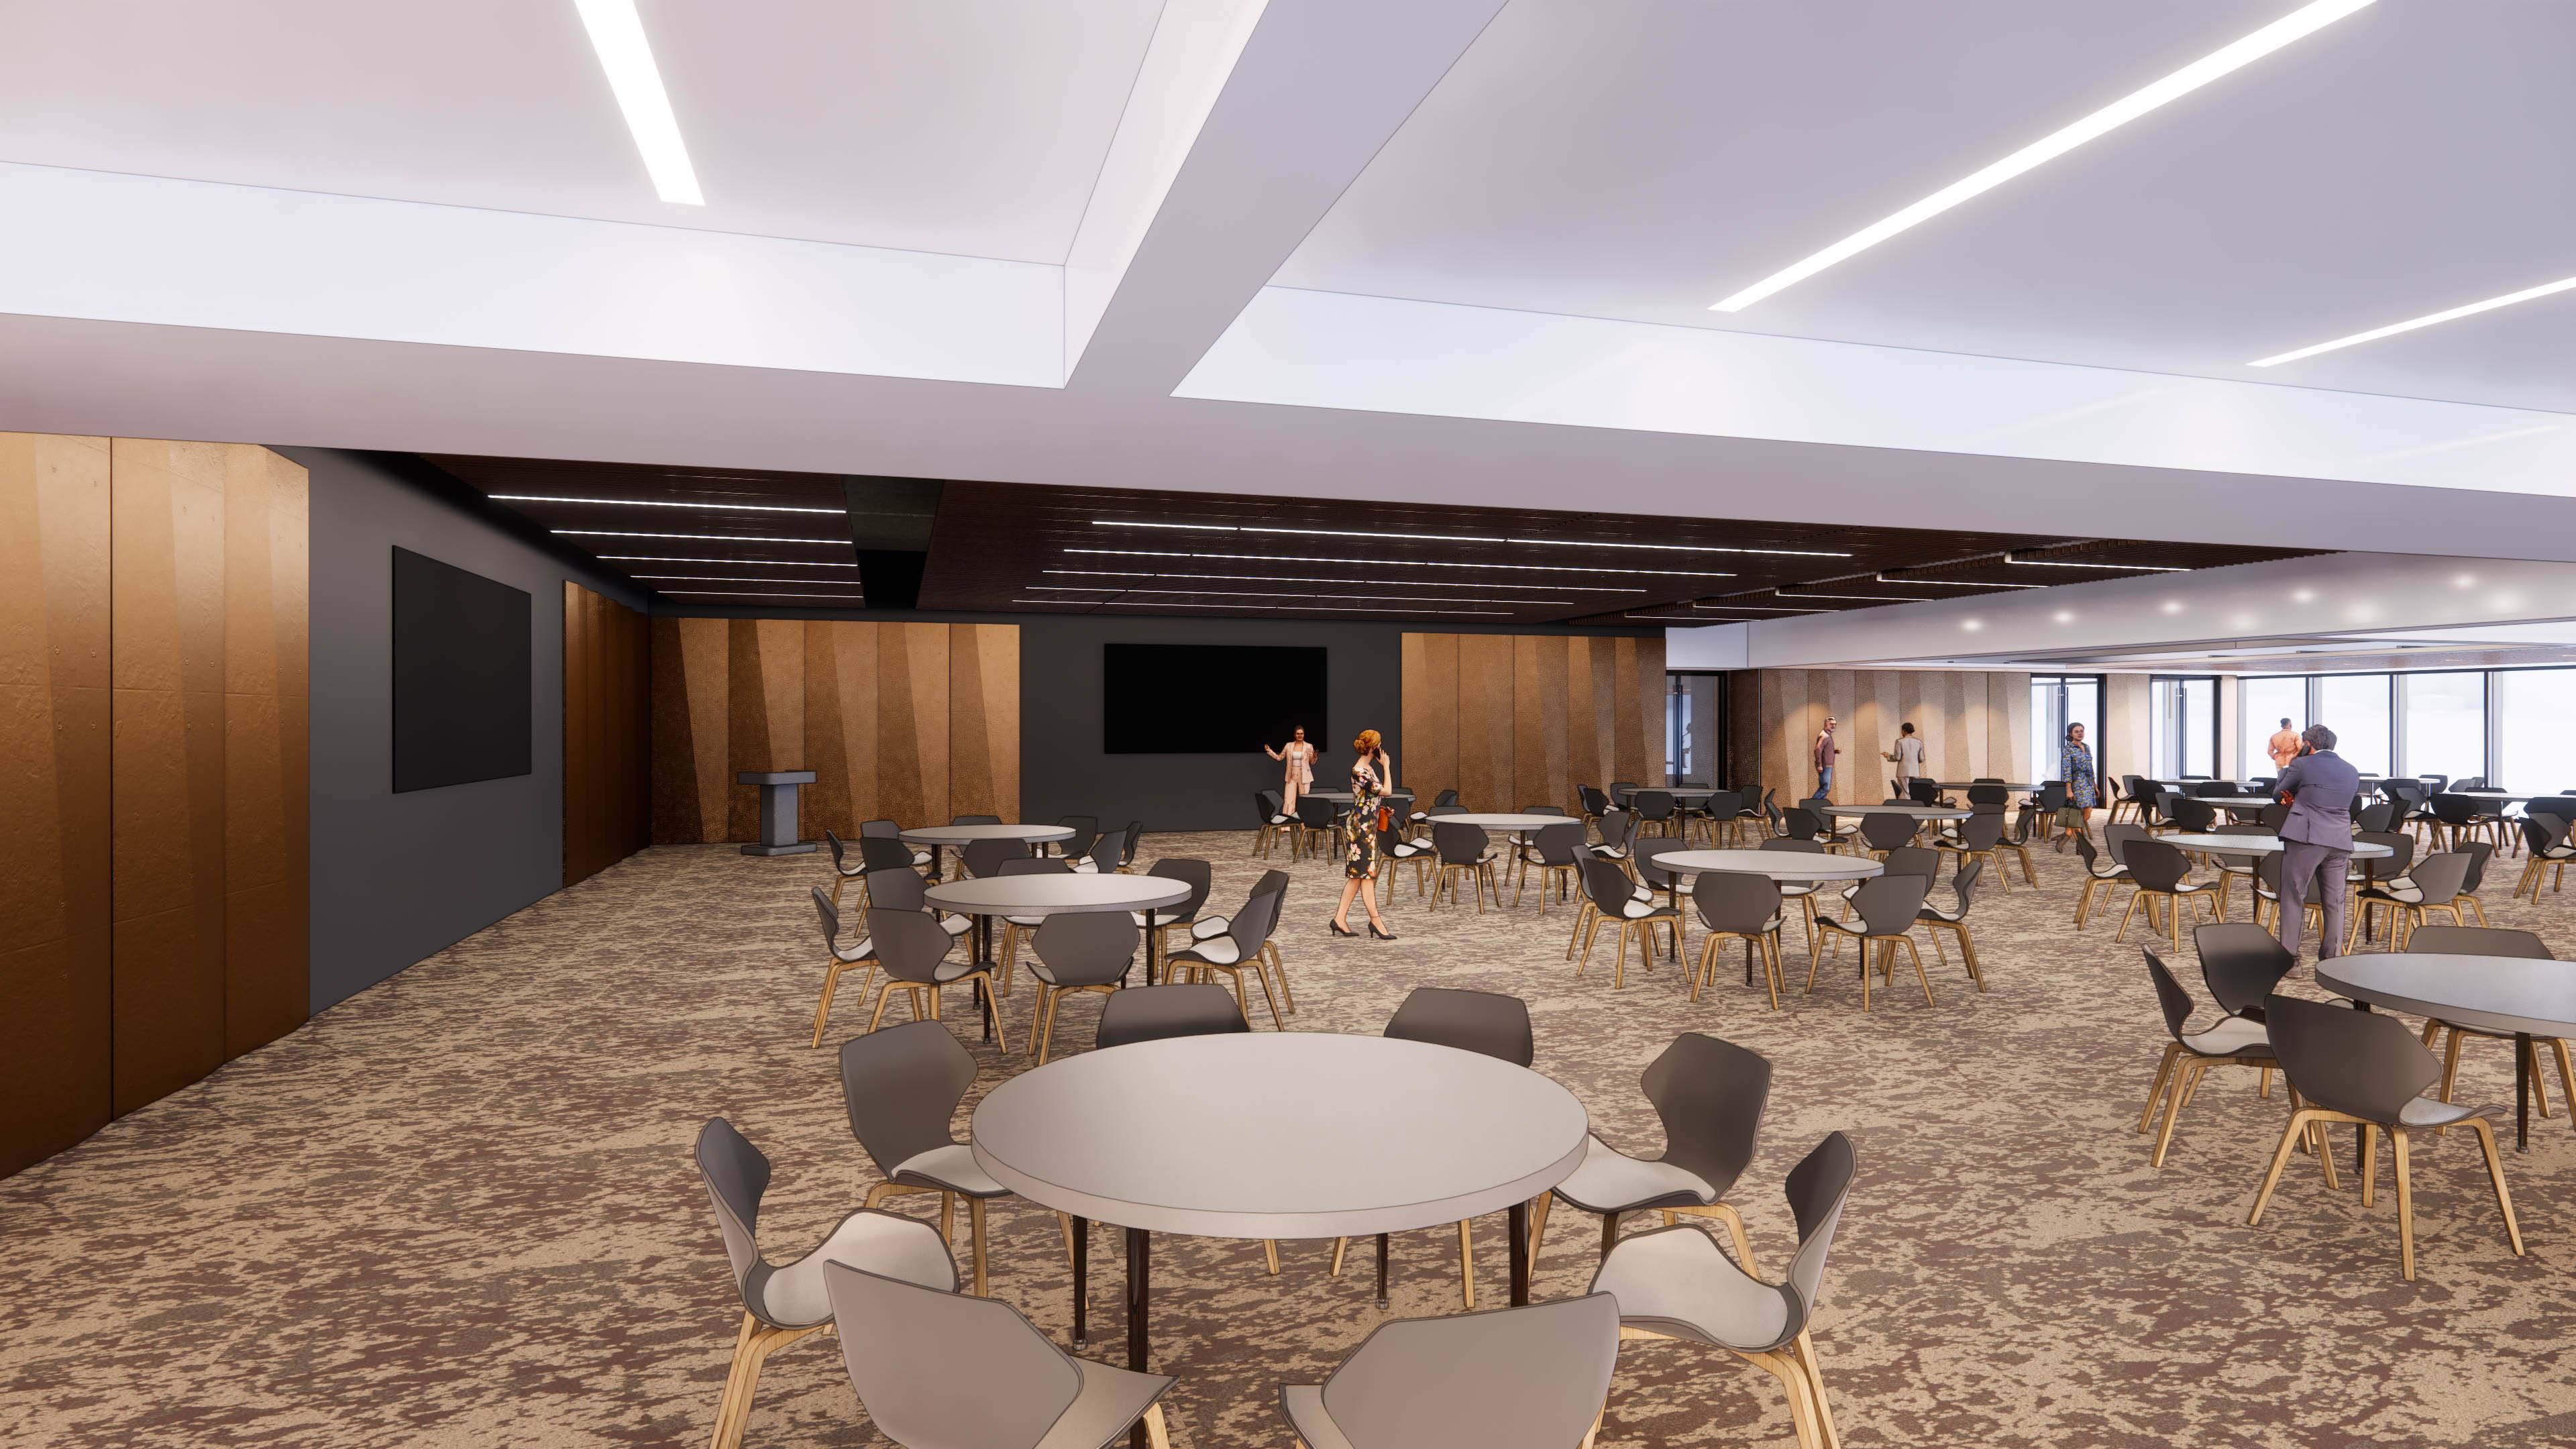 Concept rendering of interior event space